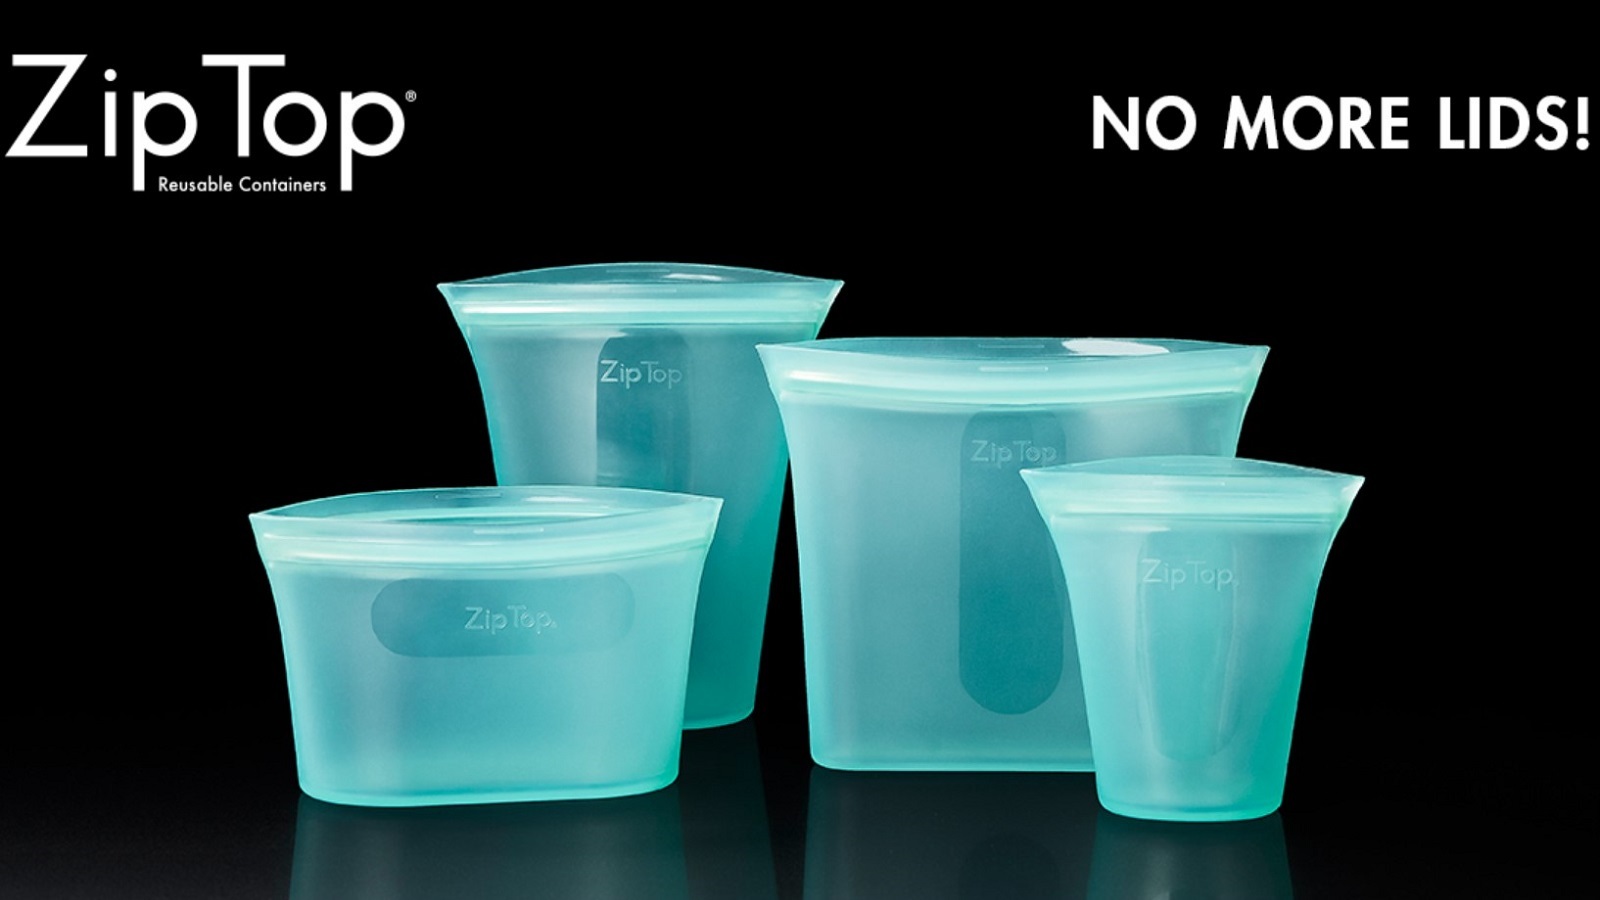 Zip Top Containers Review: *Pros and Cons* Is The Cost Truly Justified?